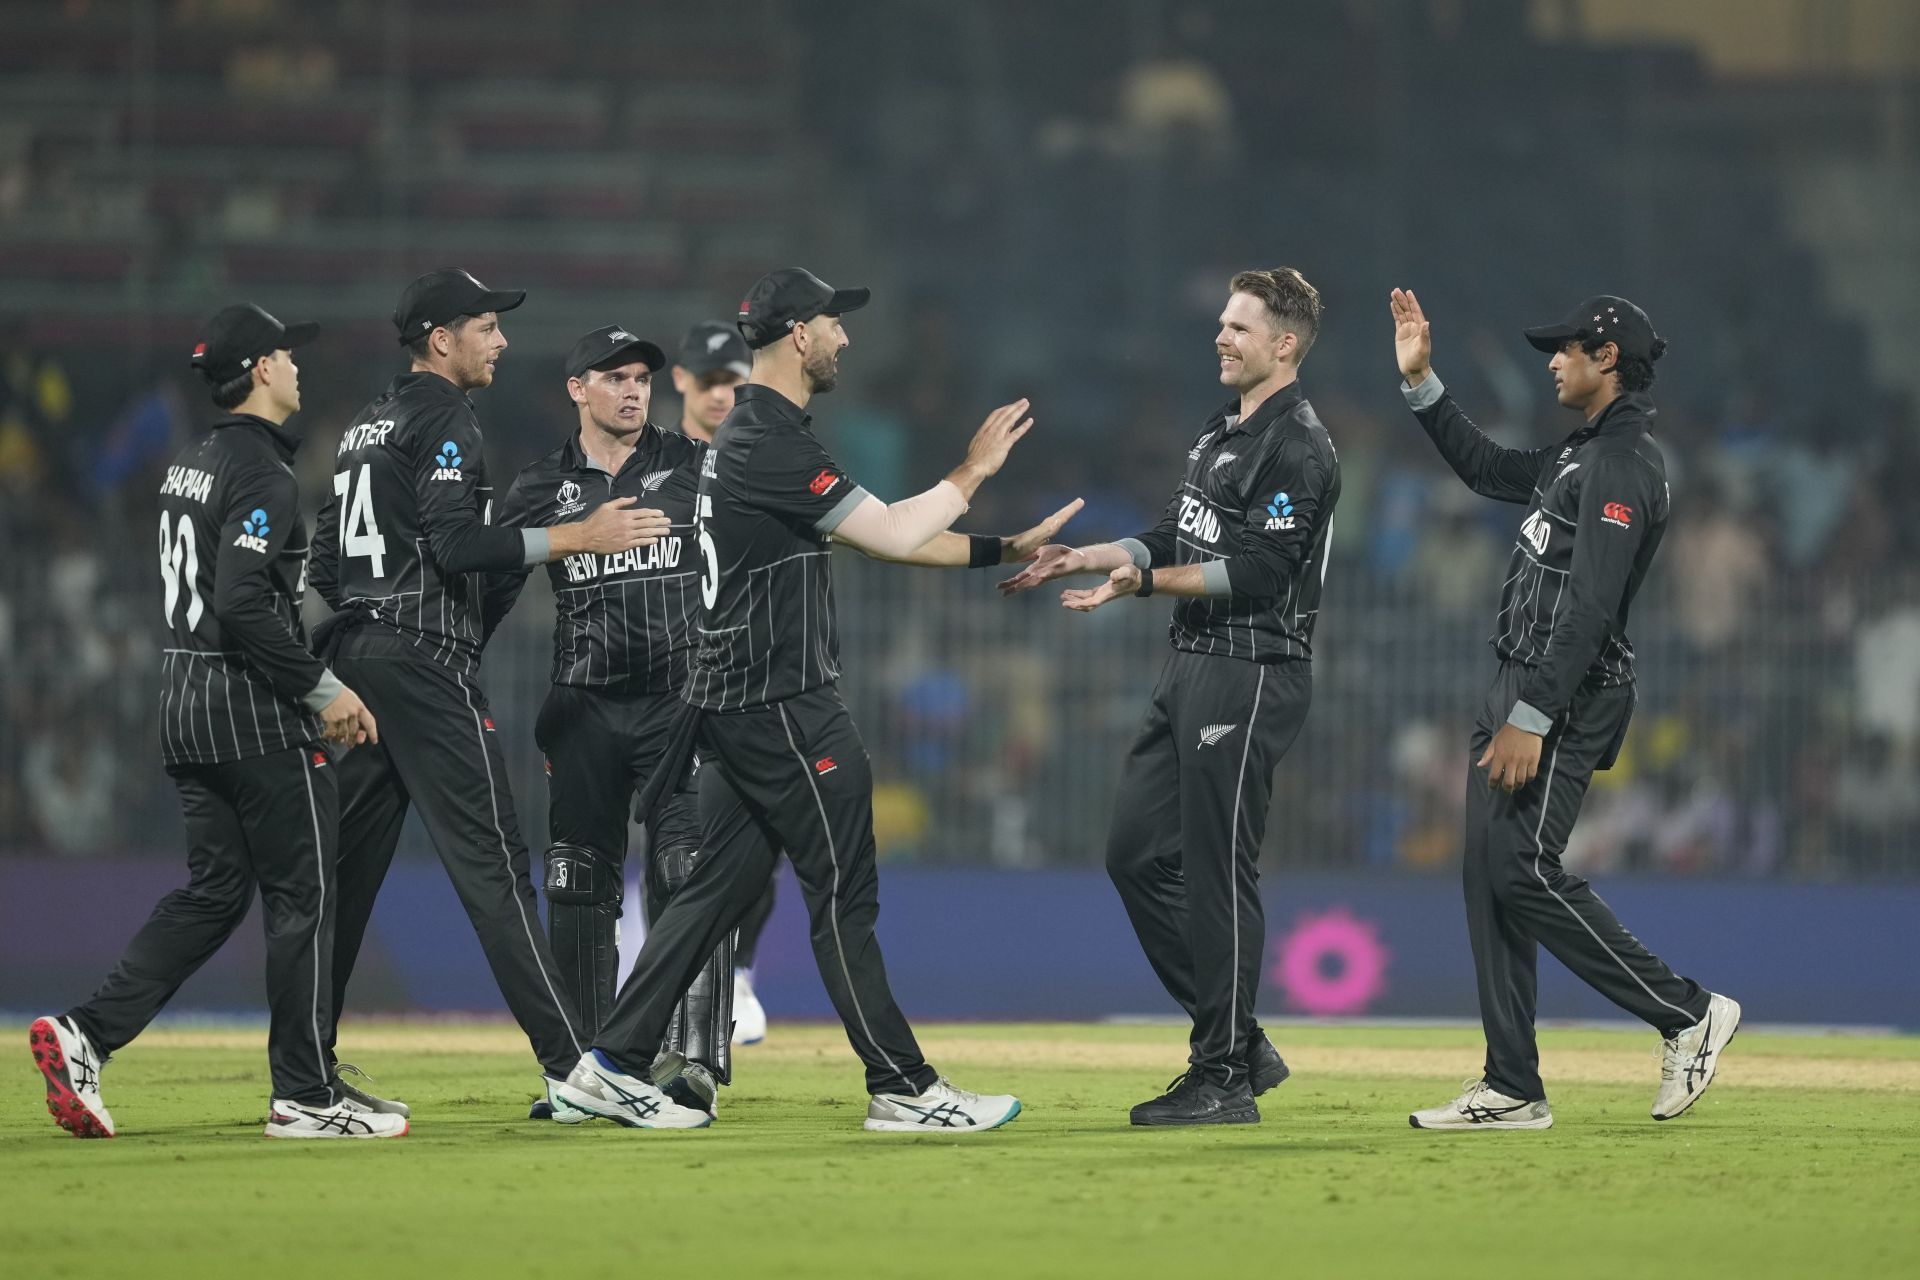 New Zealand have not lost a match to India in any ICC event since 2003. (Pic: AP)